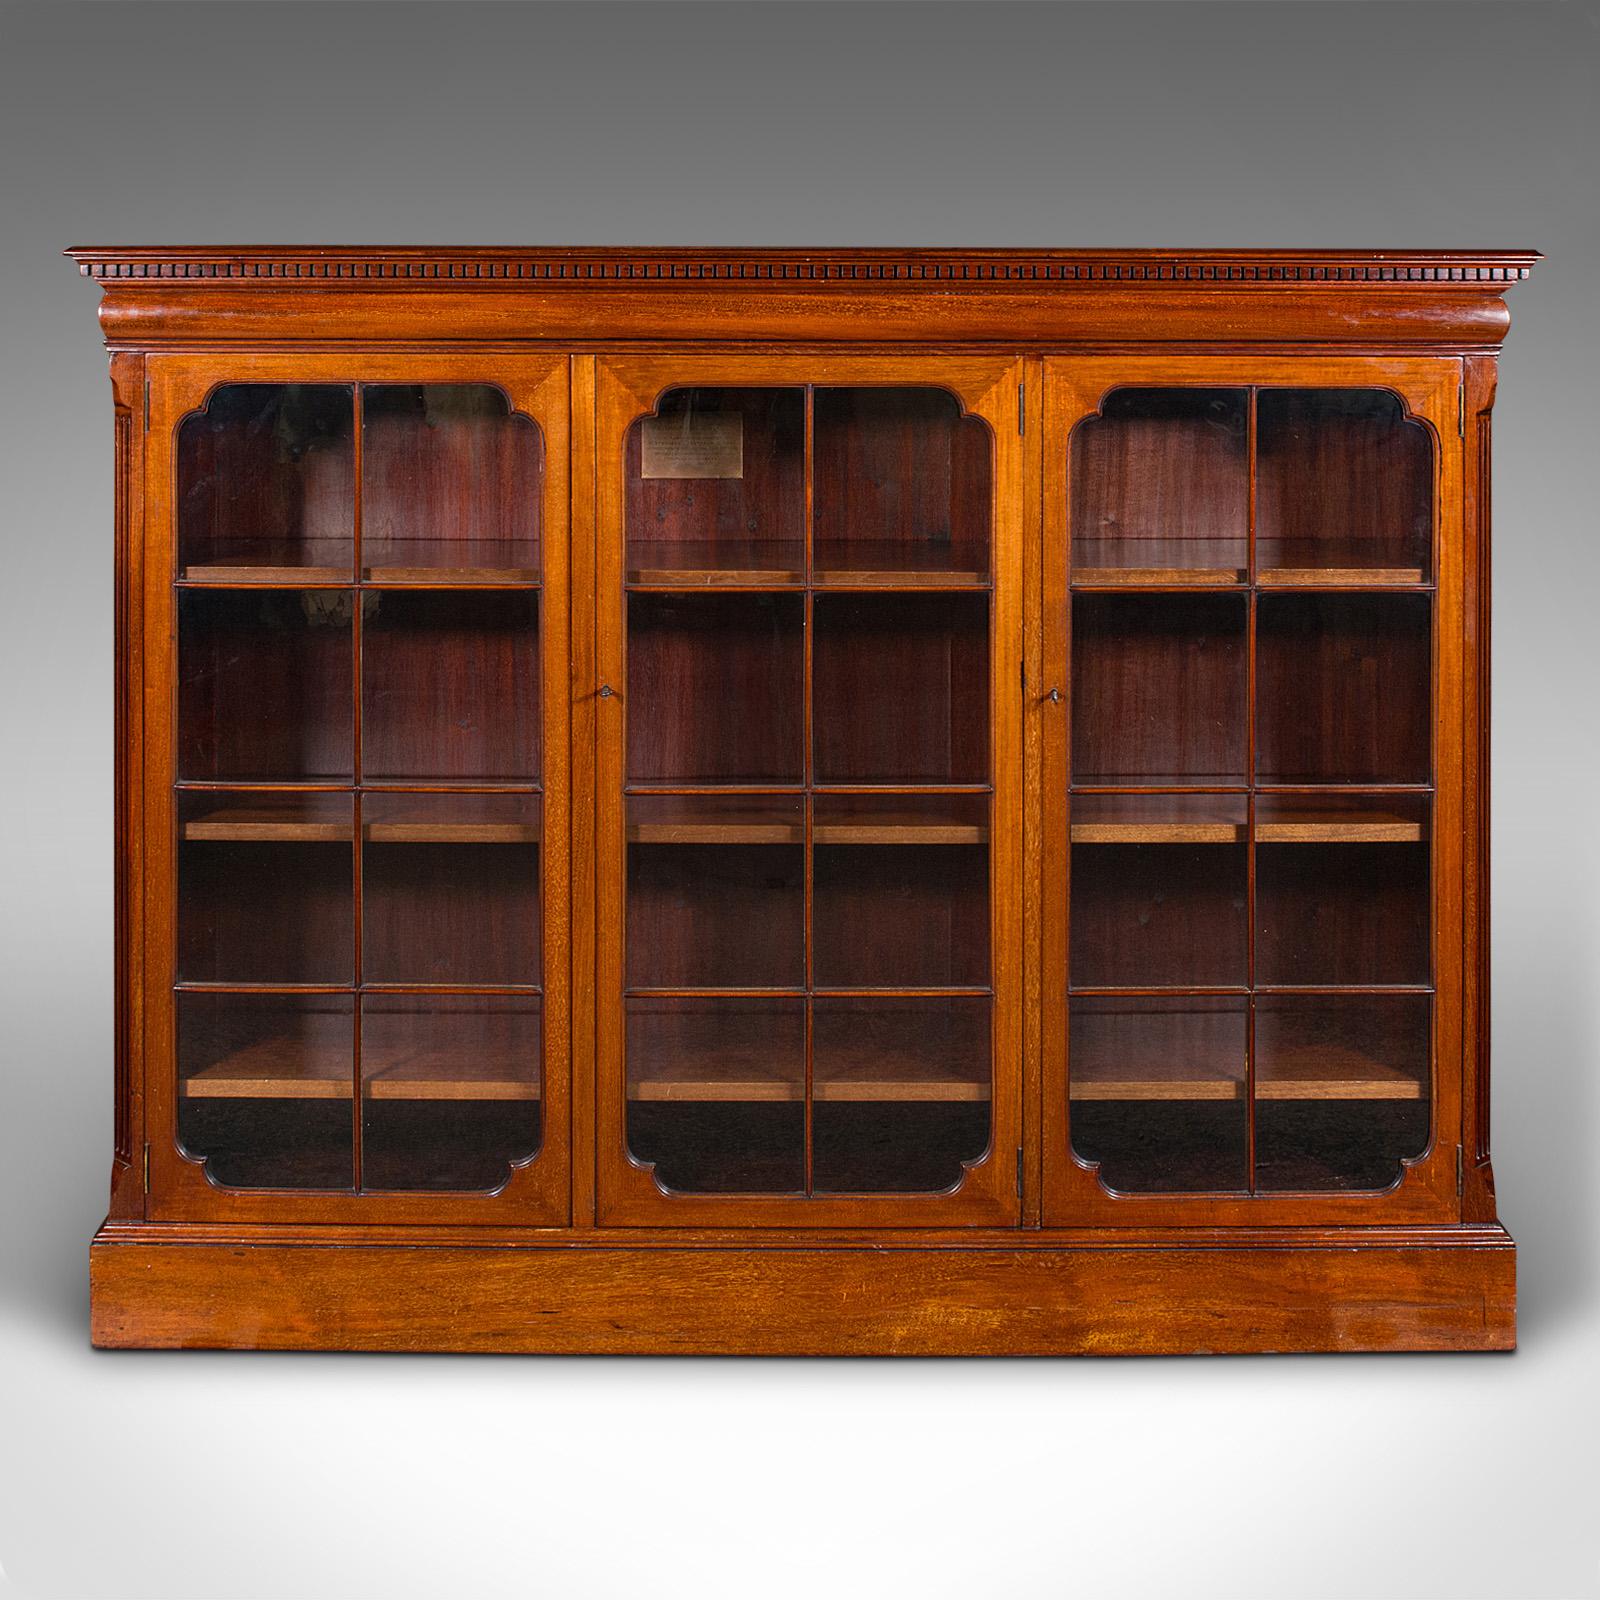 This is an antique glazed bookcase. An English, walnut library cabinet, dating to the Edwardian period, circa 1910.

Established during the Industrial Revolution as the communal church for newly built merchants houses, St. Stephen's of Westbourne